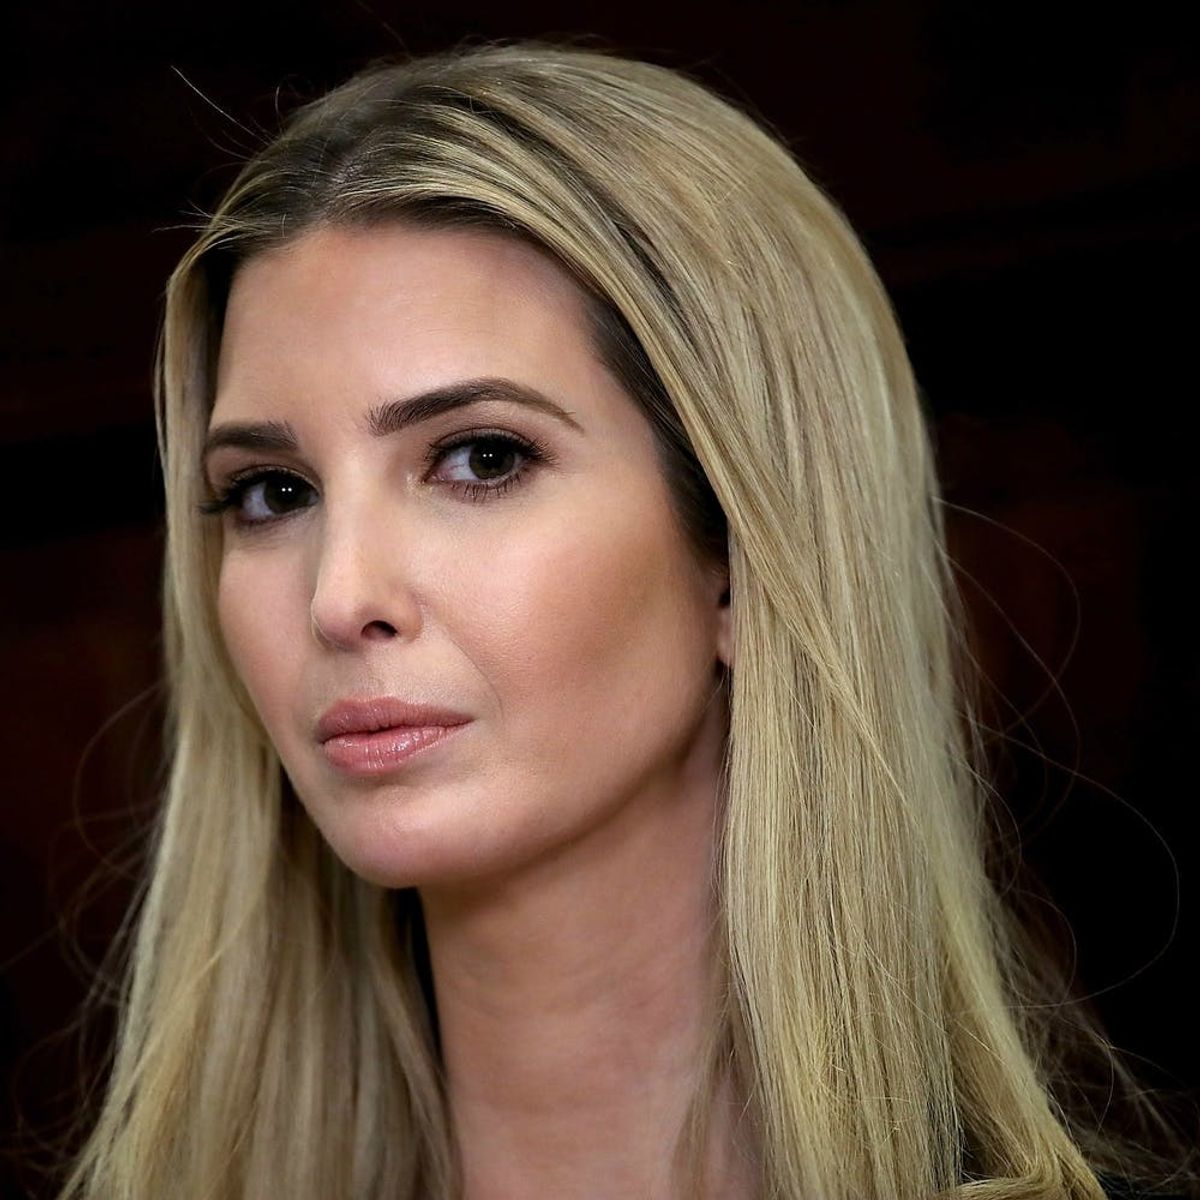 Ivanka Trump Says She Doesn’t Know If Arming Teachers Would Make Schools Safer